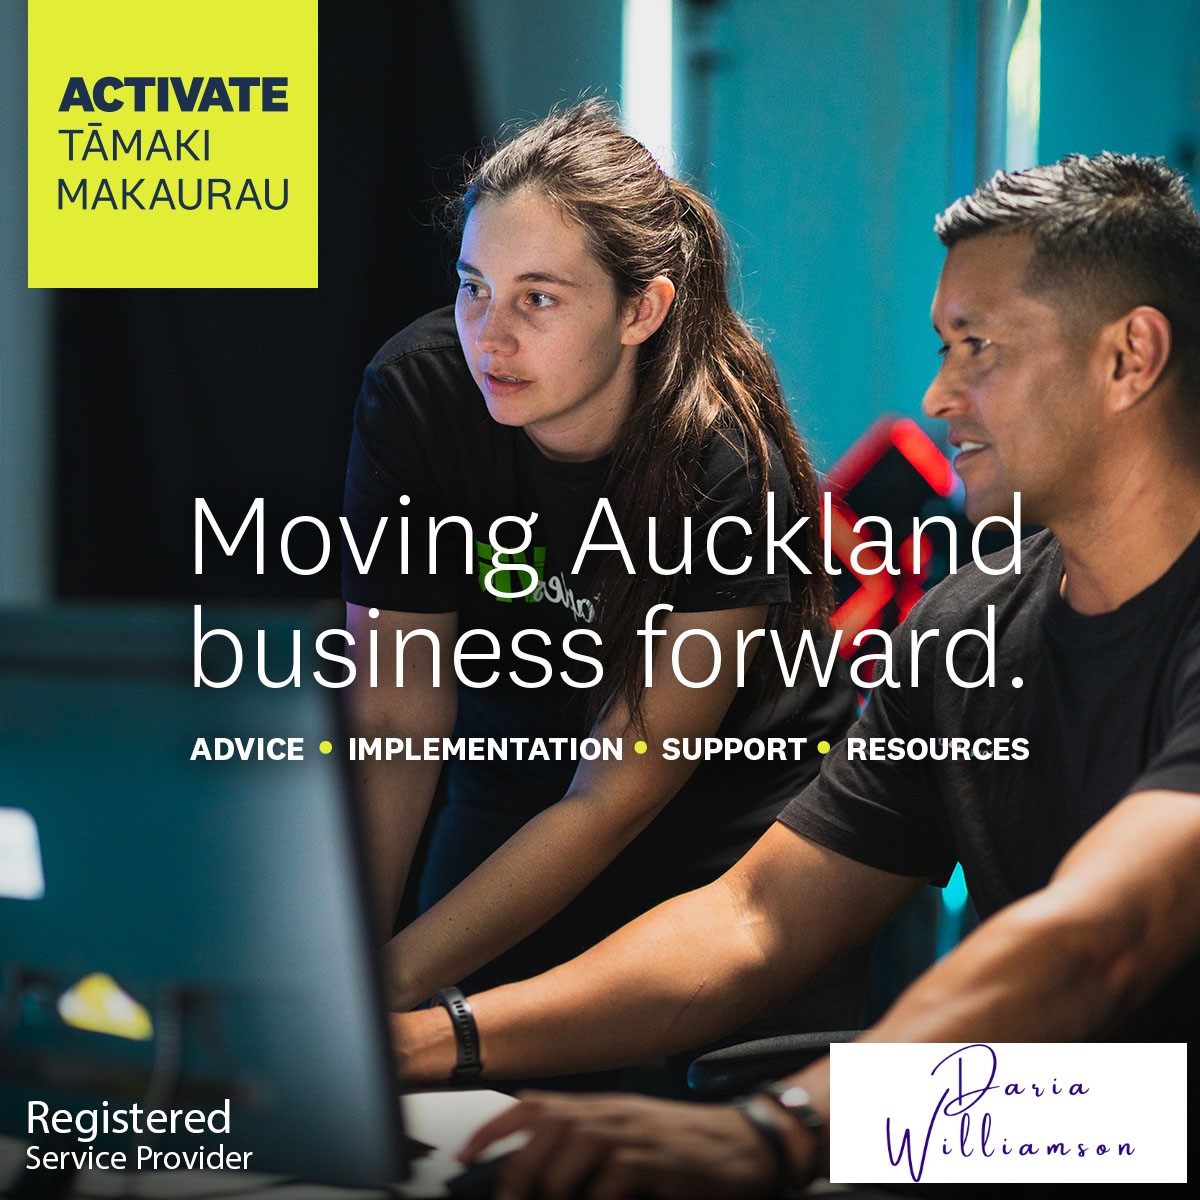 A photo of two people working on a computer with text boxes "Activate Tāmaki Makaurau", "Moving Auckland business forward", "Registered Service Provider", "Advice, implementation, support, resources", and Daria Williamson logo